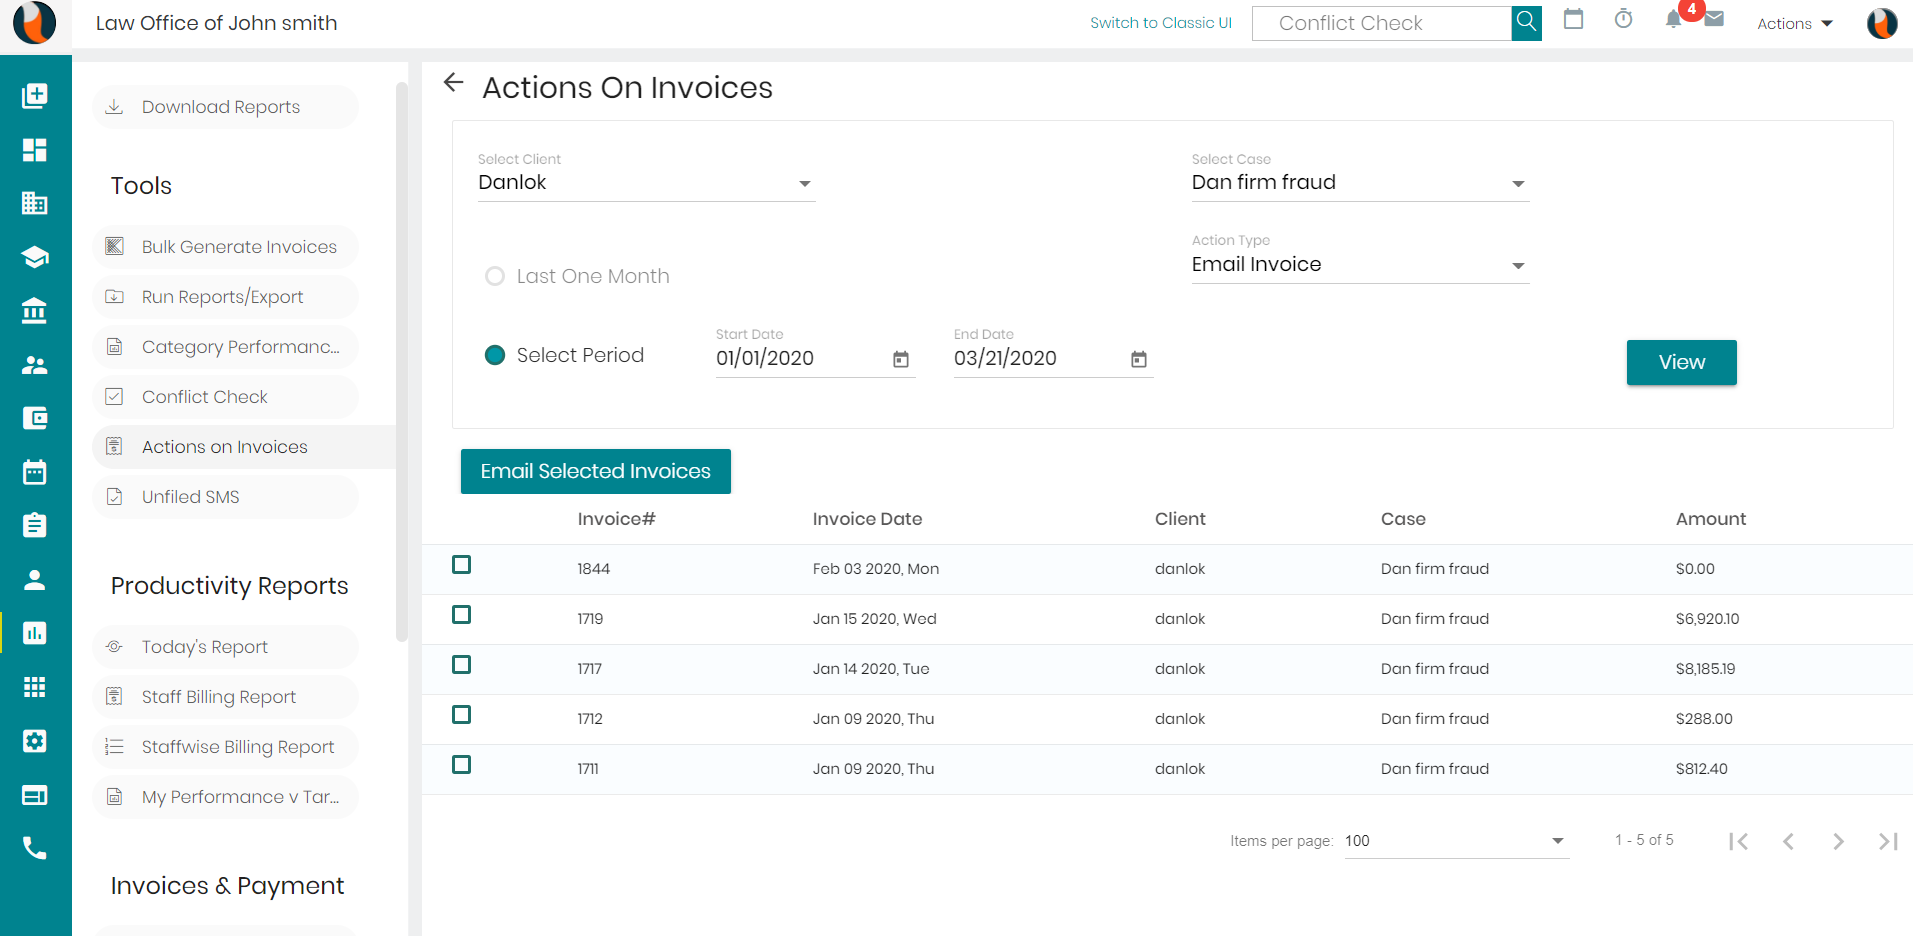 CaseFox Software - Screenshot of Action on invoices